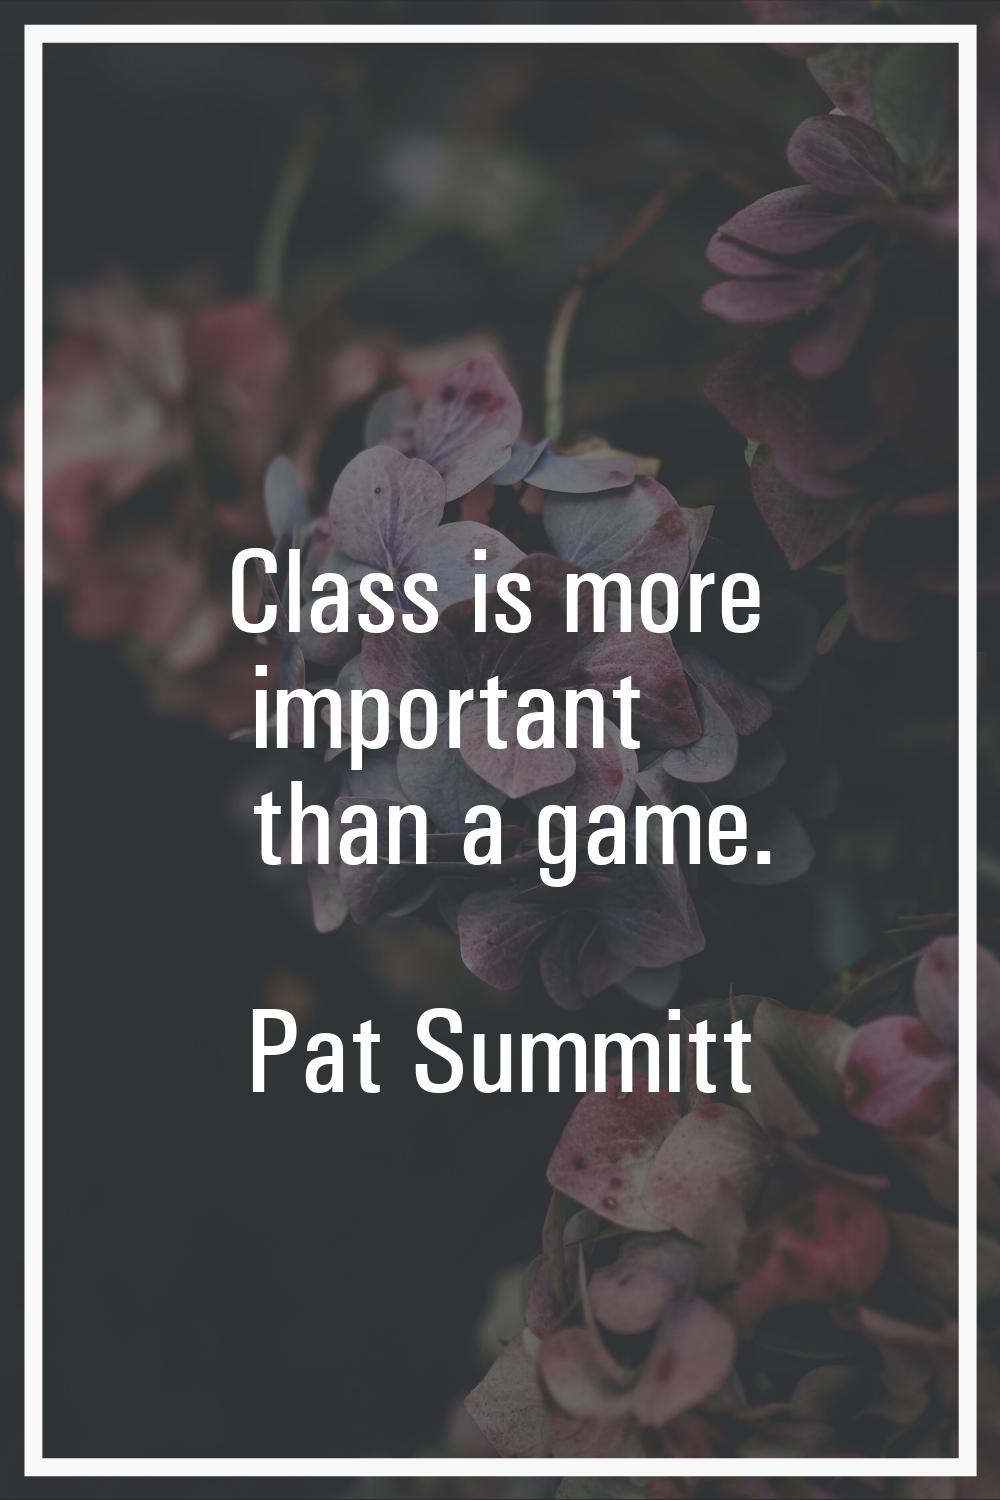 Class is more important than a game.